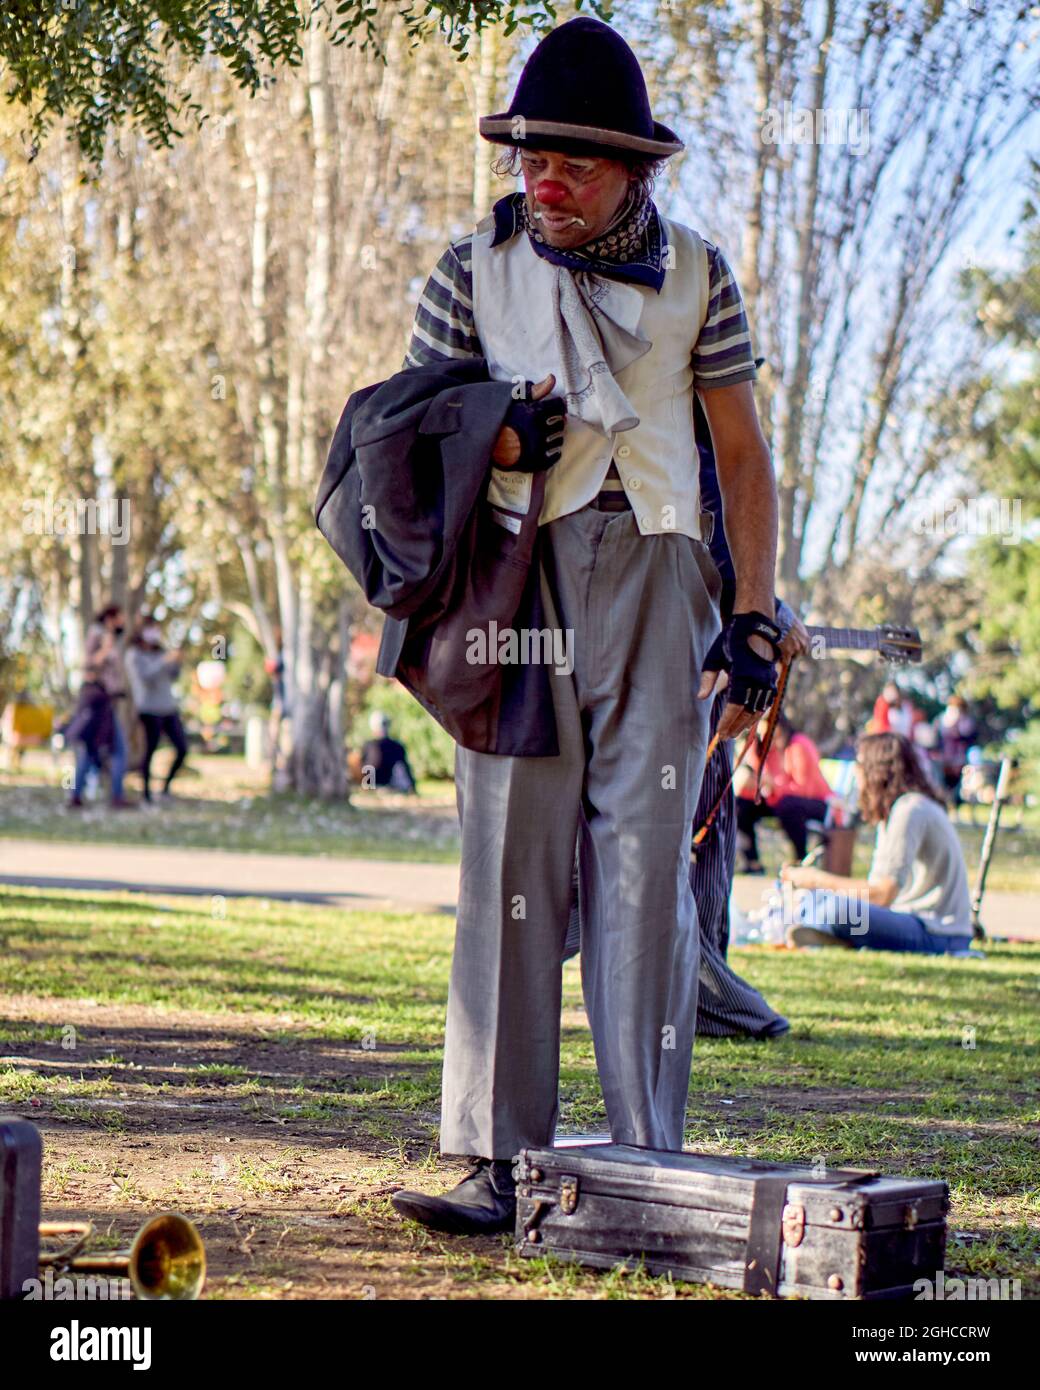 Pensive man in the clown costume in park, looking sad holding his coat. vertical. Argentina Stock Photo